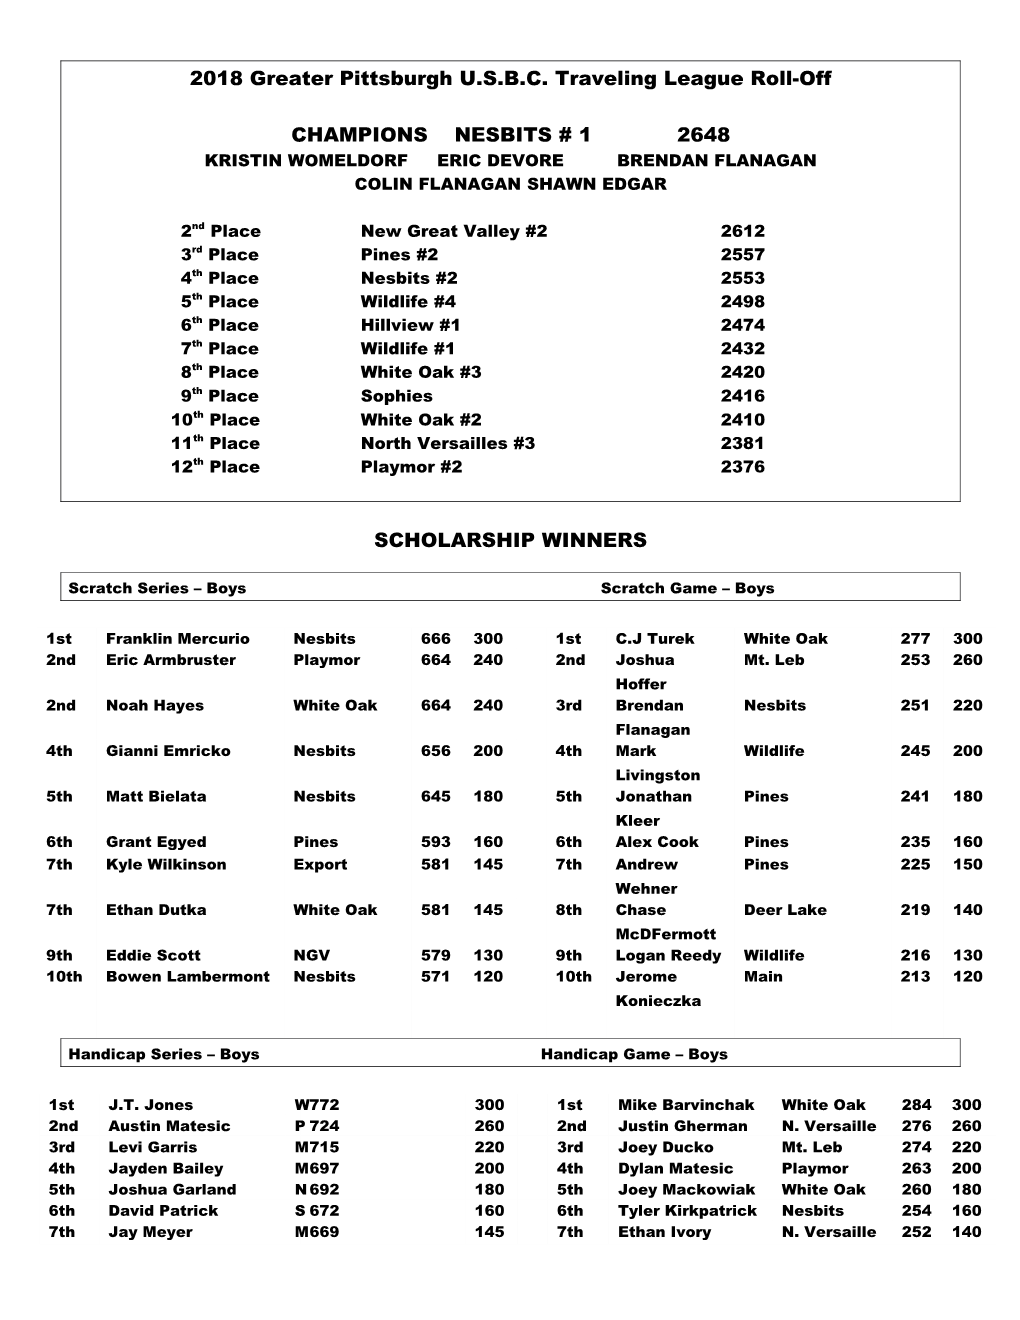 2002 Greater Pittsburgh Traveling League Roll-Offs